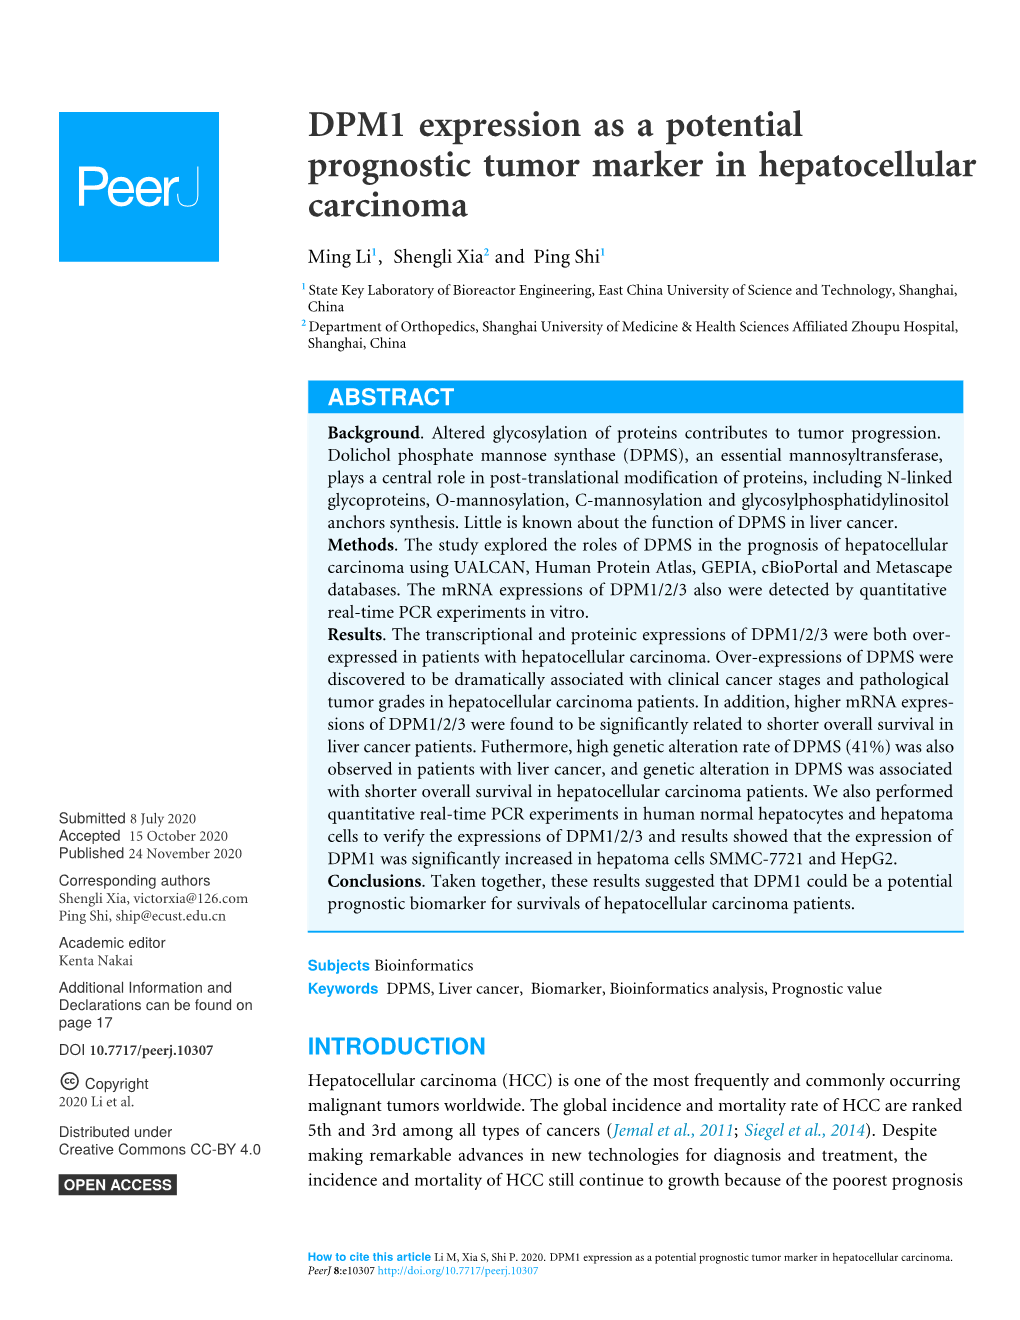 DPM1 Expression As a Potential Prognostic Tumor Marker in Hepatocellular Carcinoma